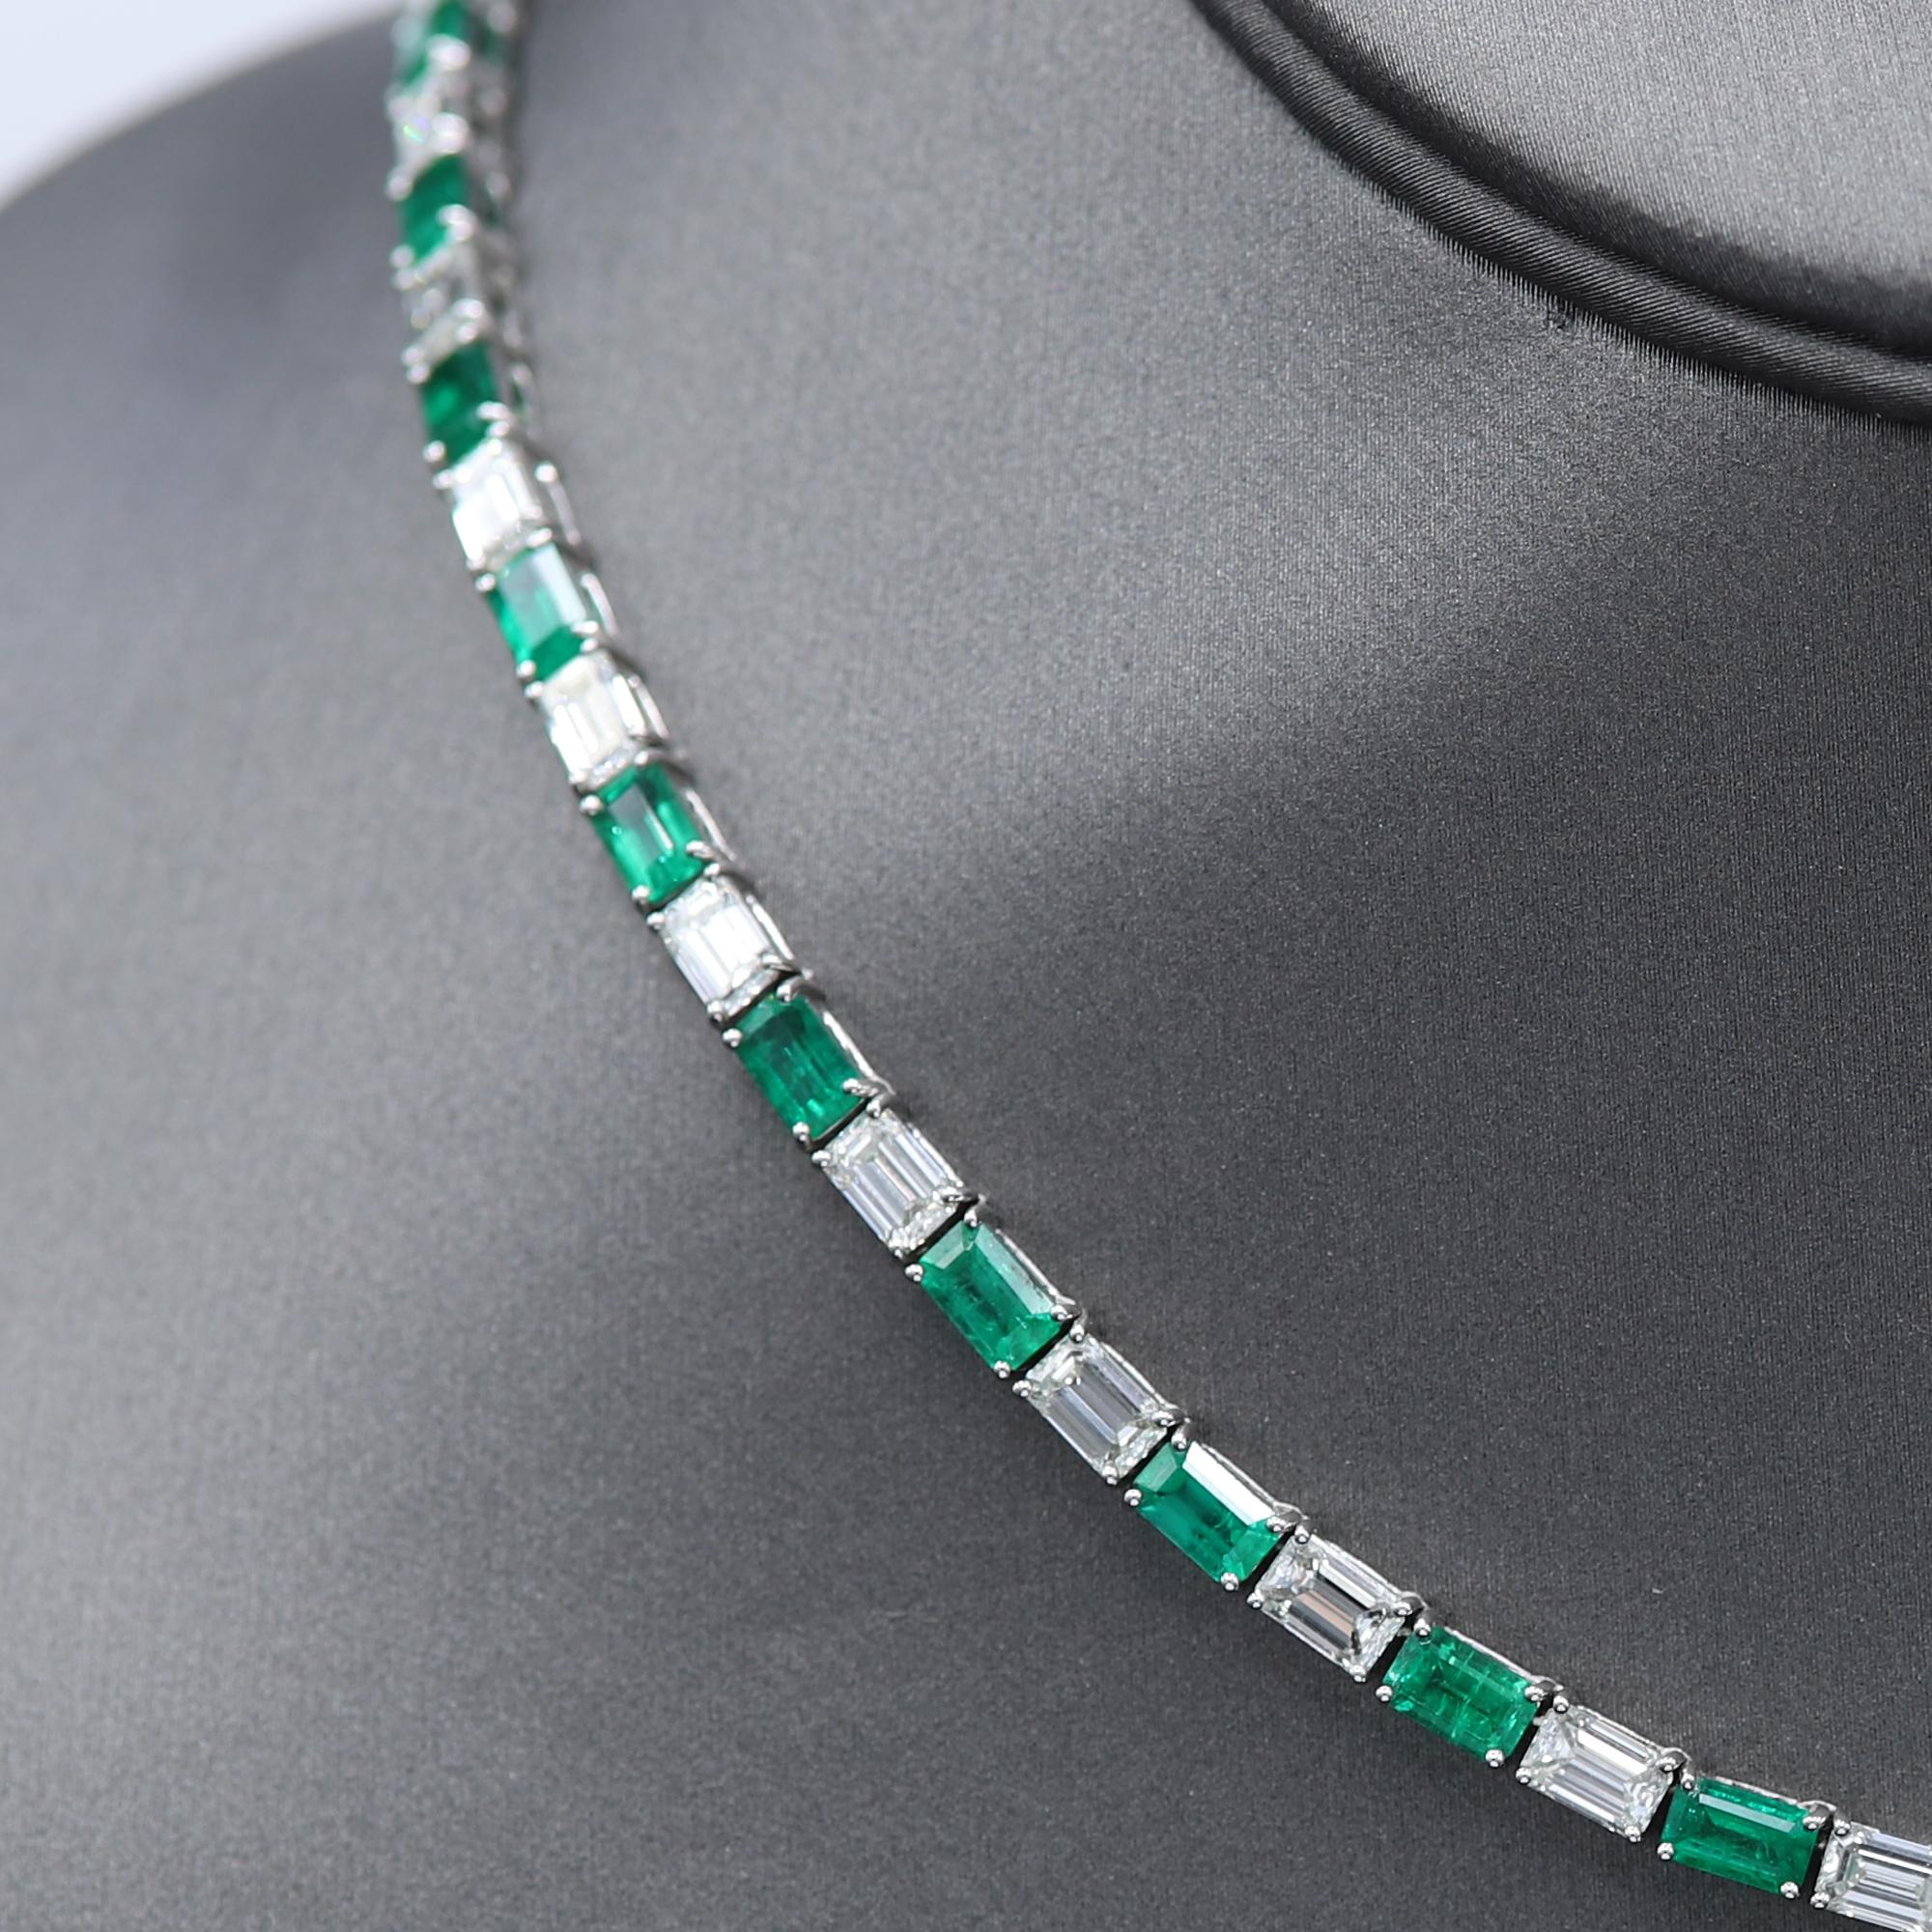 Sleek Classic Emerald & Diamond Necklace (all around)
Baguette Shape stones size 5 x 3 mm
18k White Gold 22 grams
Total Emerald 10.44 carats [ colombia ]
Total Diamonds 12.27 carat G-VVS
All stones are Natural.
the High value of this necklace are